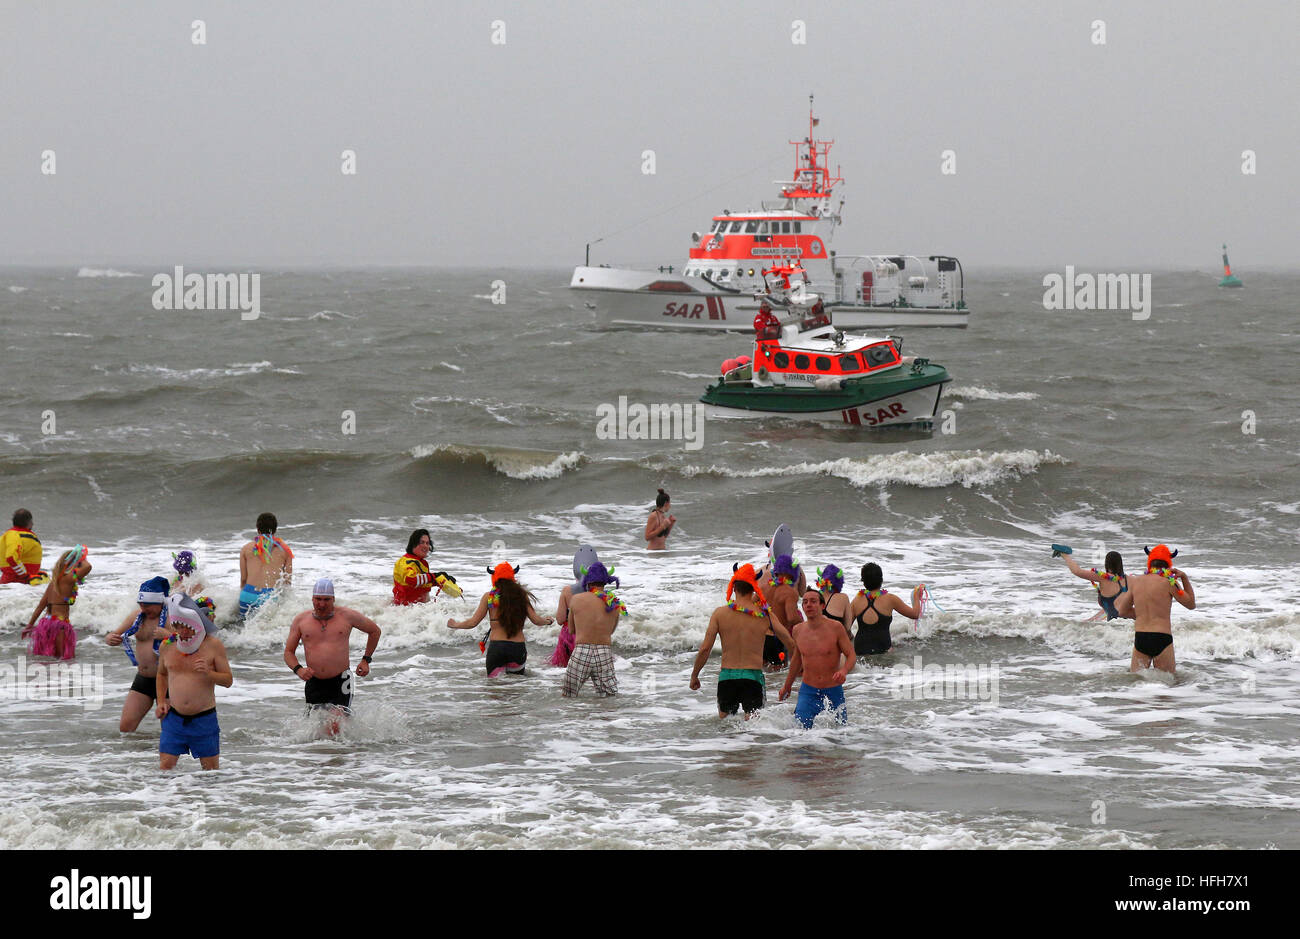 Norderney, Germany. 01st Jan, 2017. Courageous participants run into the cold 4-degree North Sea during a New Year's swim on Norderney, Germany, 01 January 2017. The air was not much warmer and there was also a brisk wind. Thousands of spectators watched the spectacle. Photo: Sabine Sykora/dpa/Alamy Live News Stock Photo